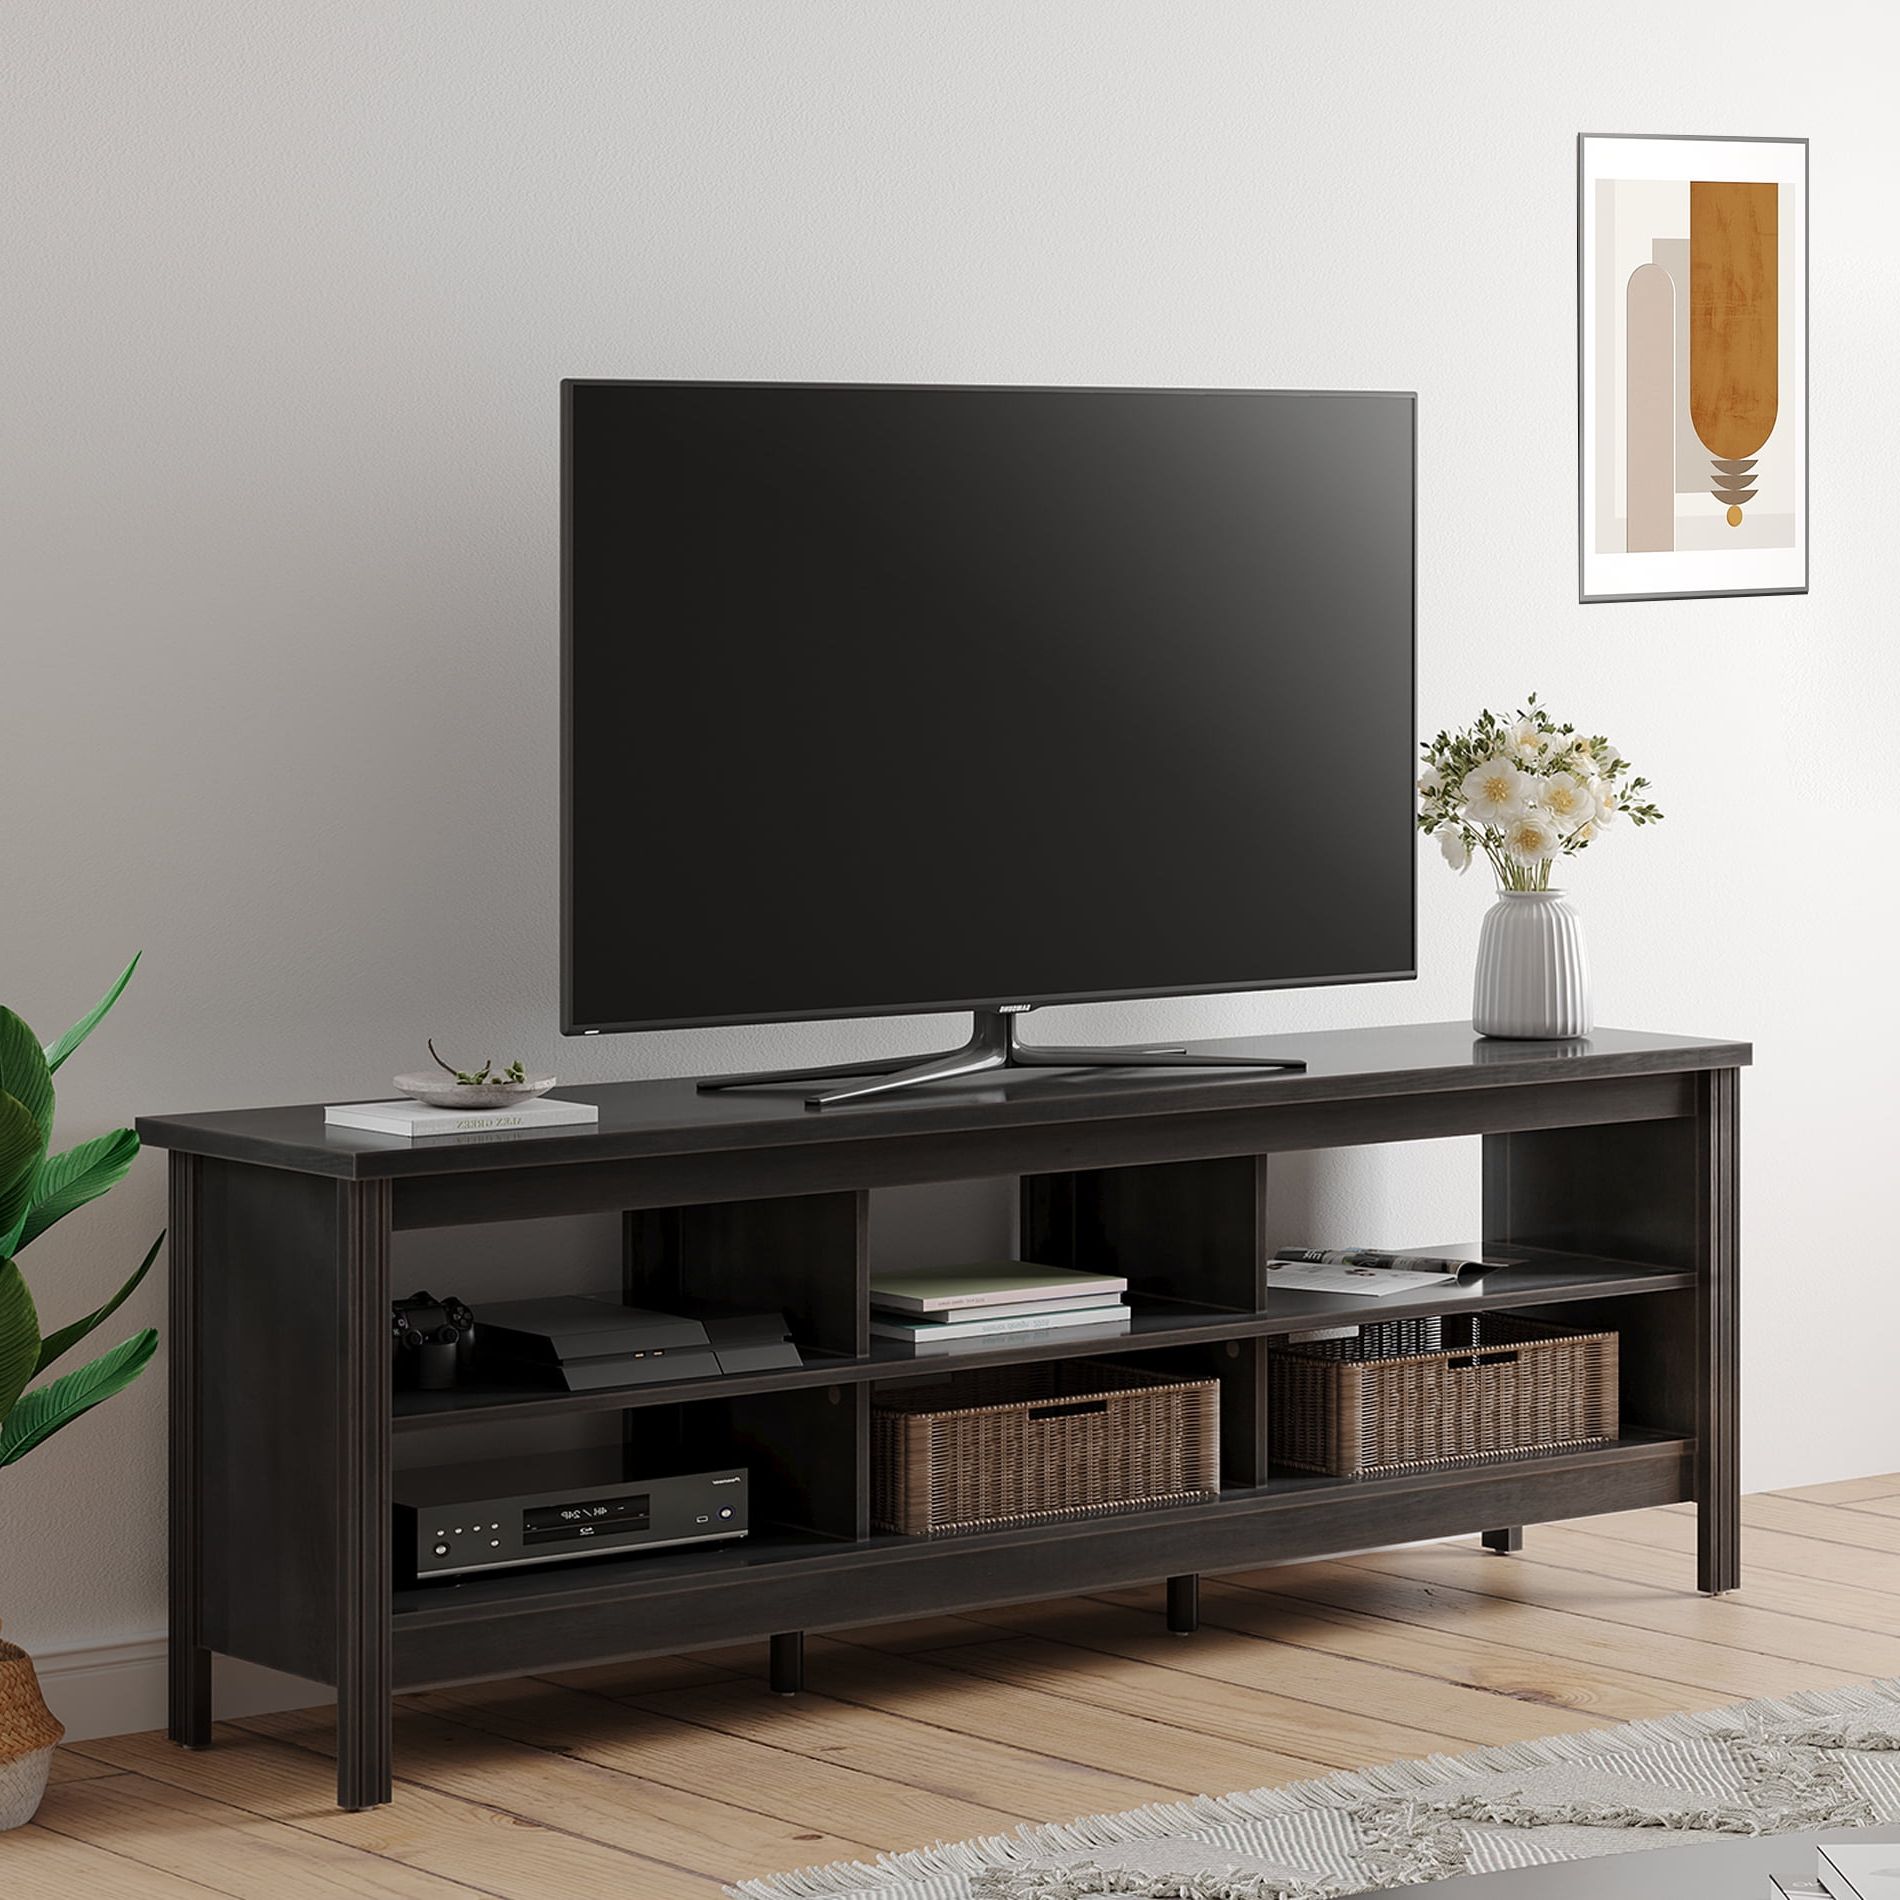 Farmhouse Tv Stand For Tvs Up To 75" Tv Entertainment Center Media Pertaining To Well Known Farmhouse Tv Stands For 70 Inch Tv (View 8 of 15)